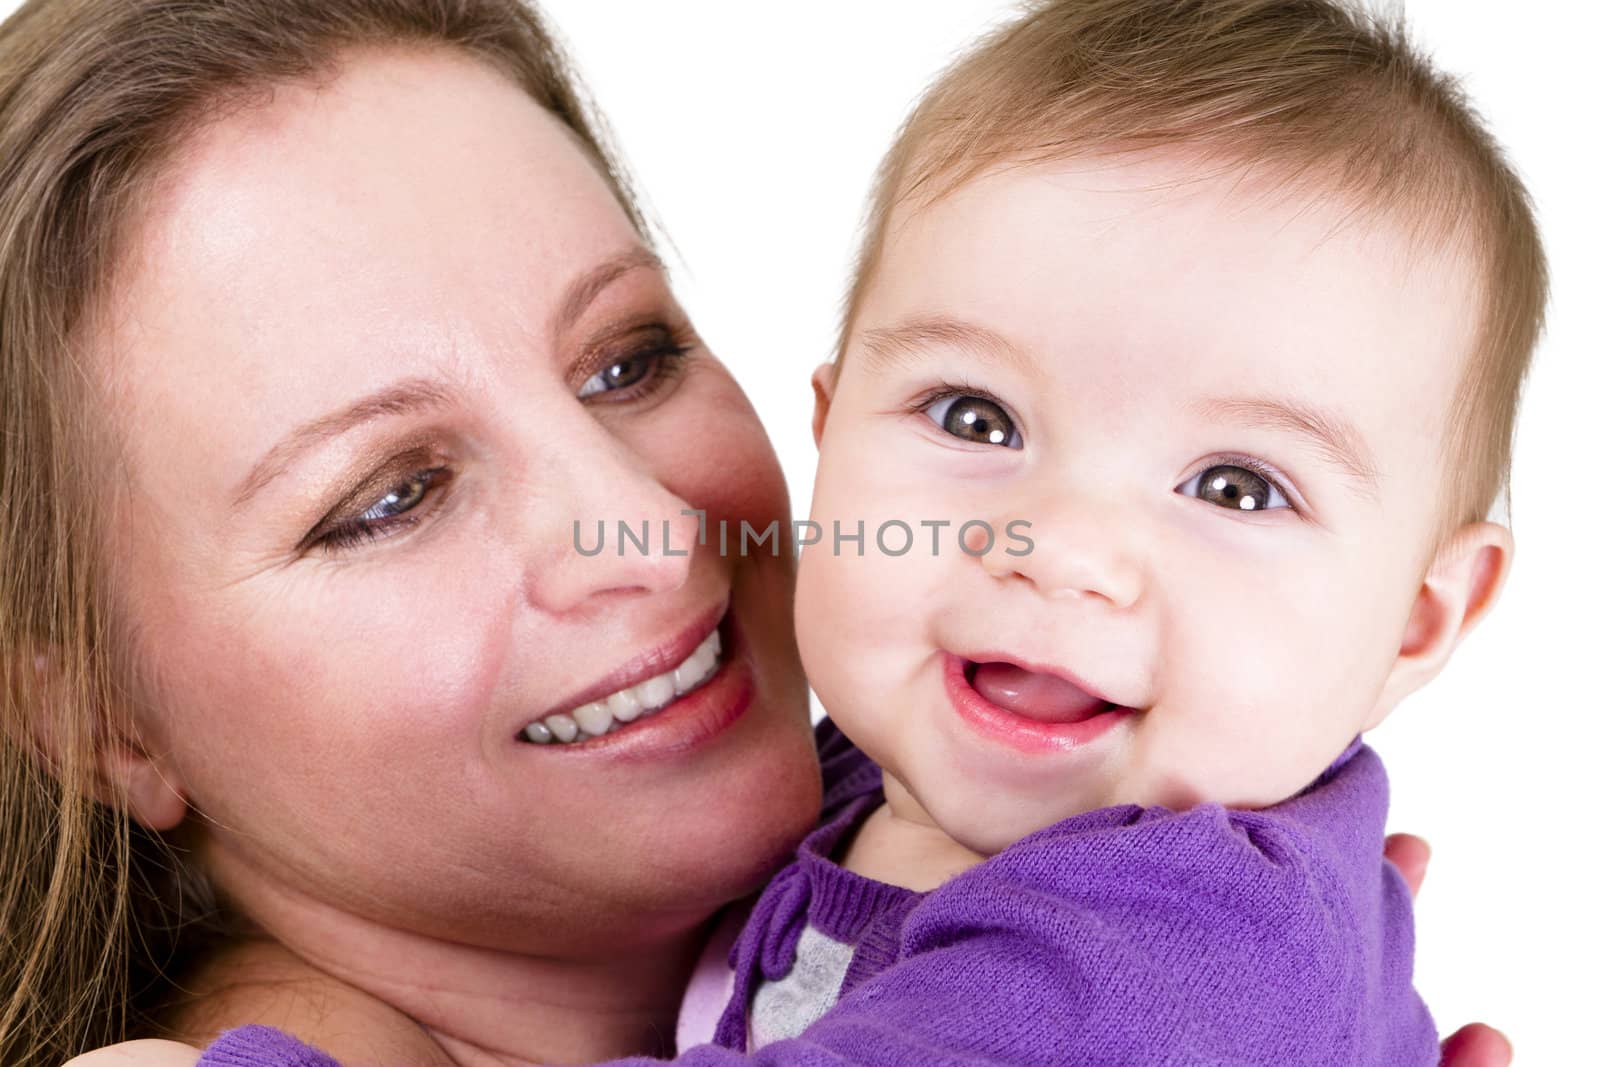 Proud mother looking at  smiling eight months old baby. Baby have a surprized happy look.